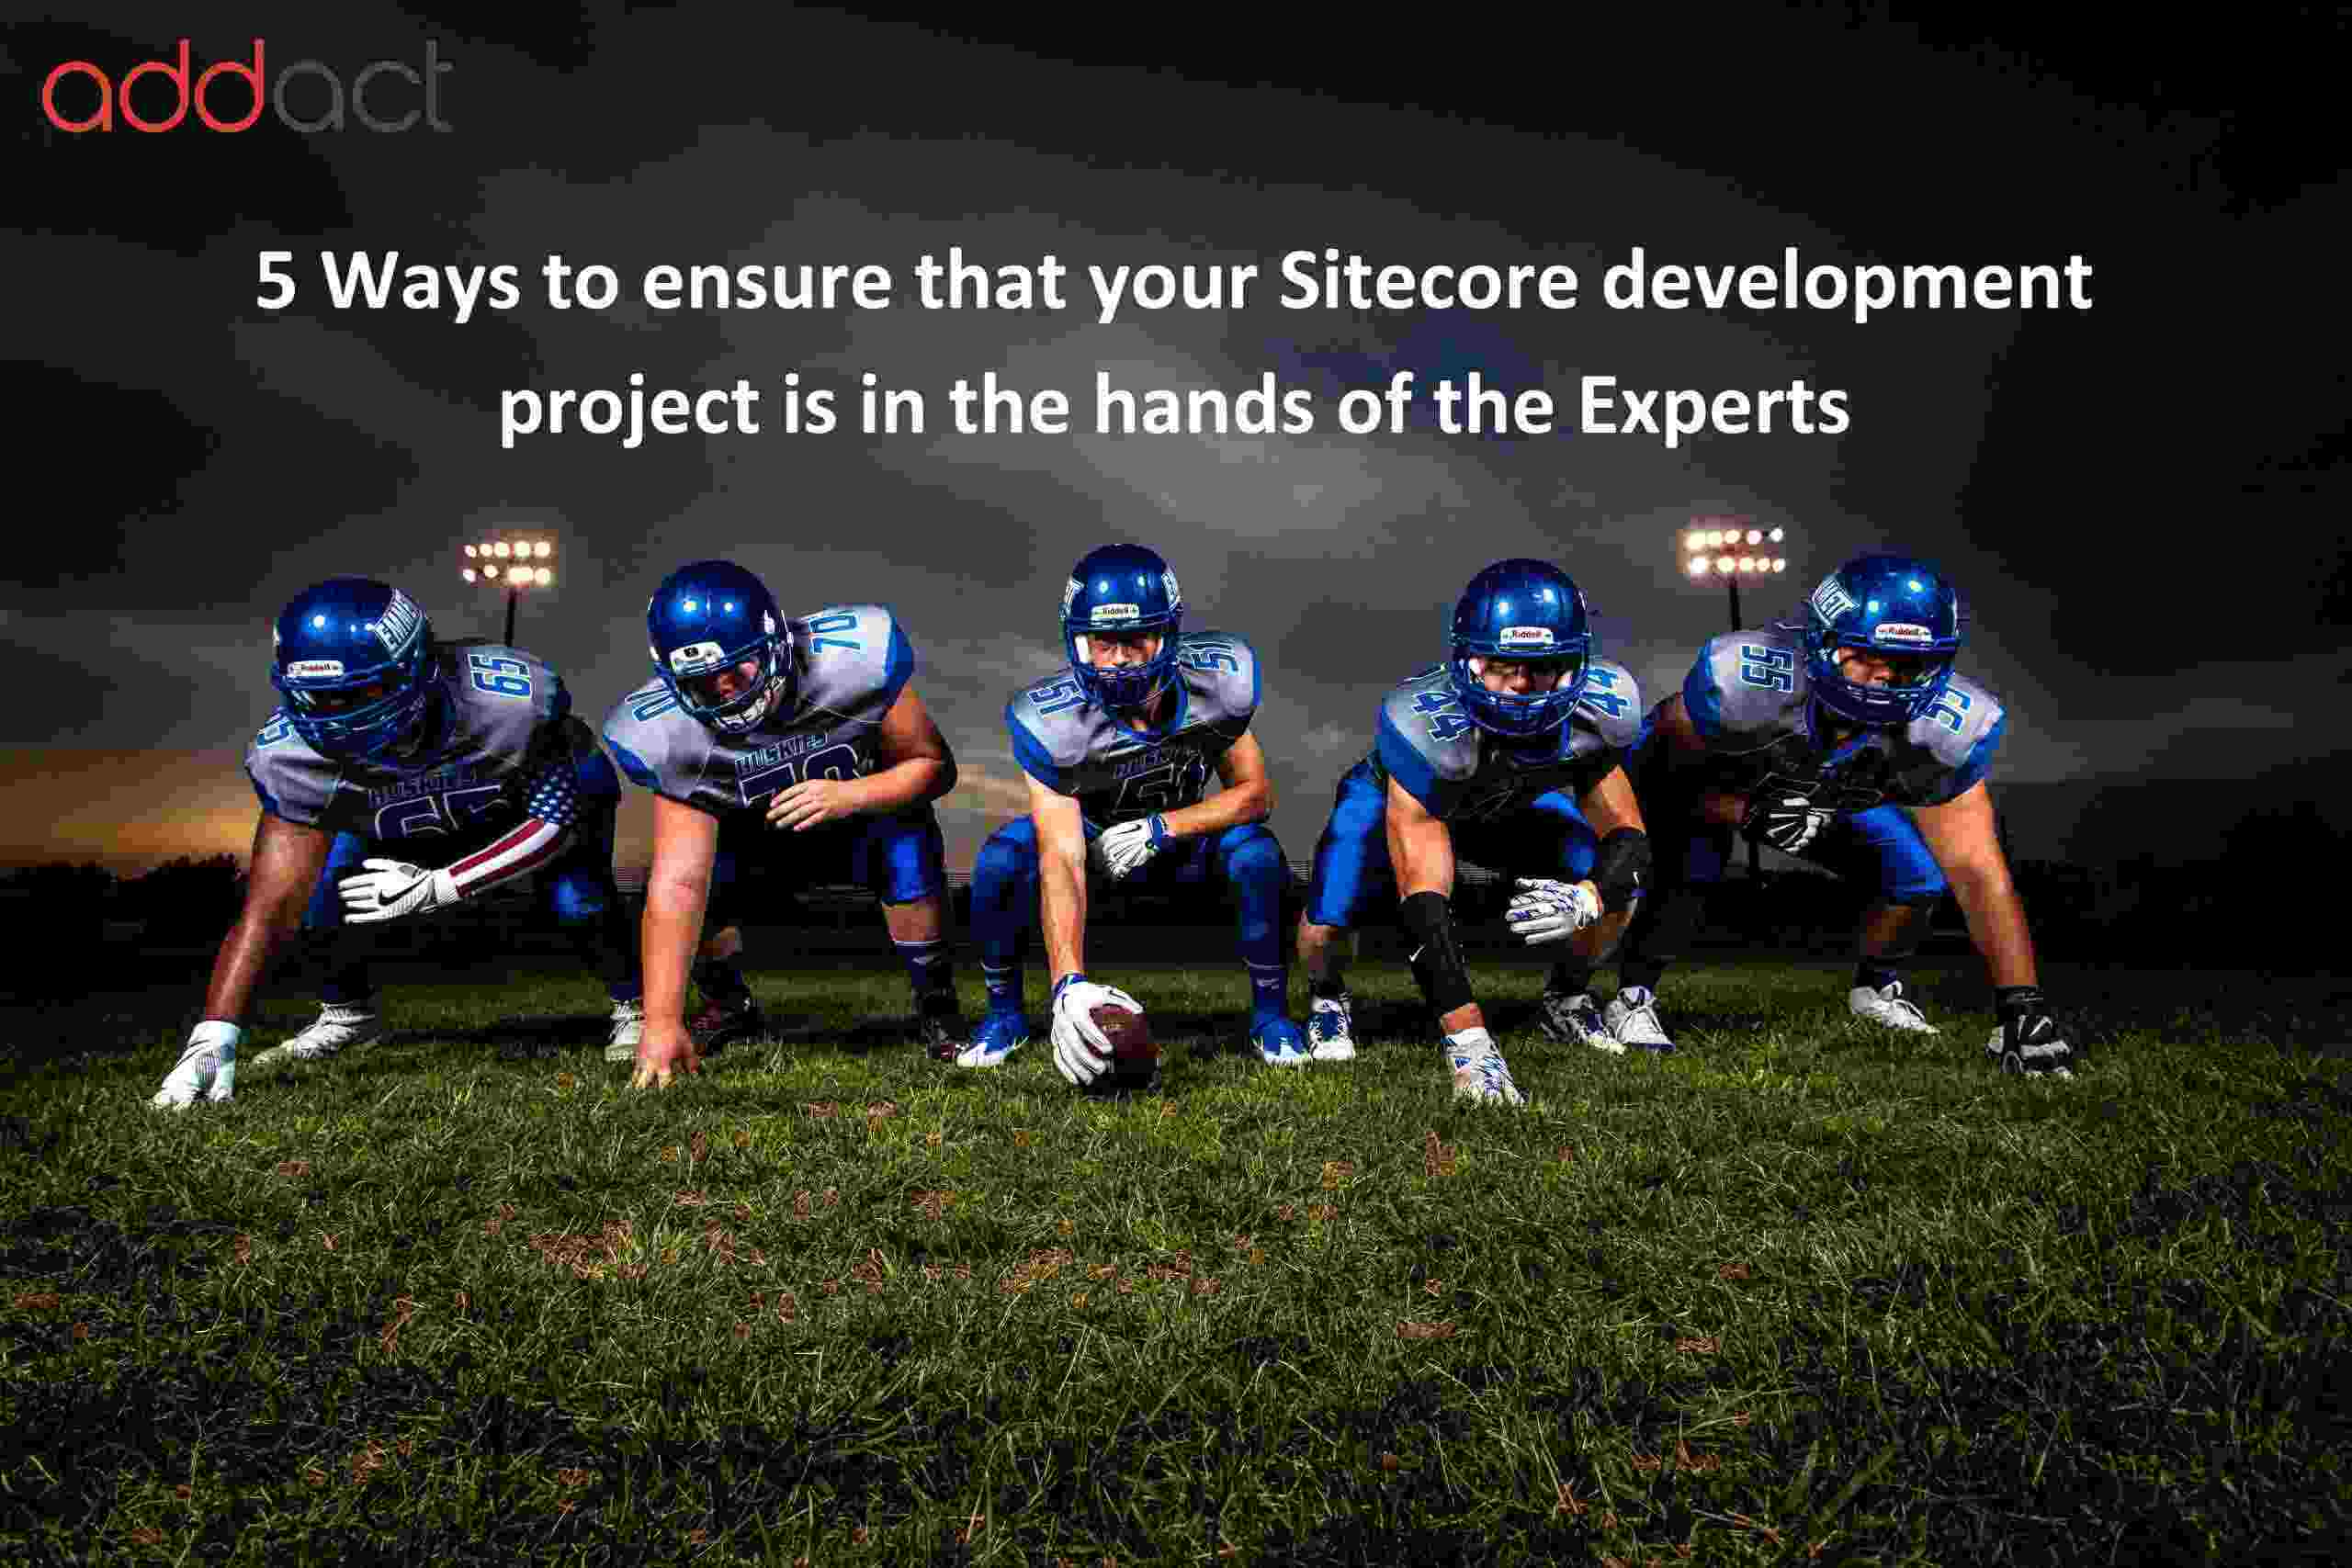 5-ways-to-ensure-that-your-sitecore-development-project-is-in-the-hands-of-the-experts-1